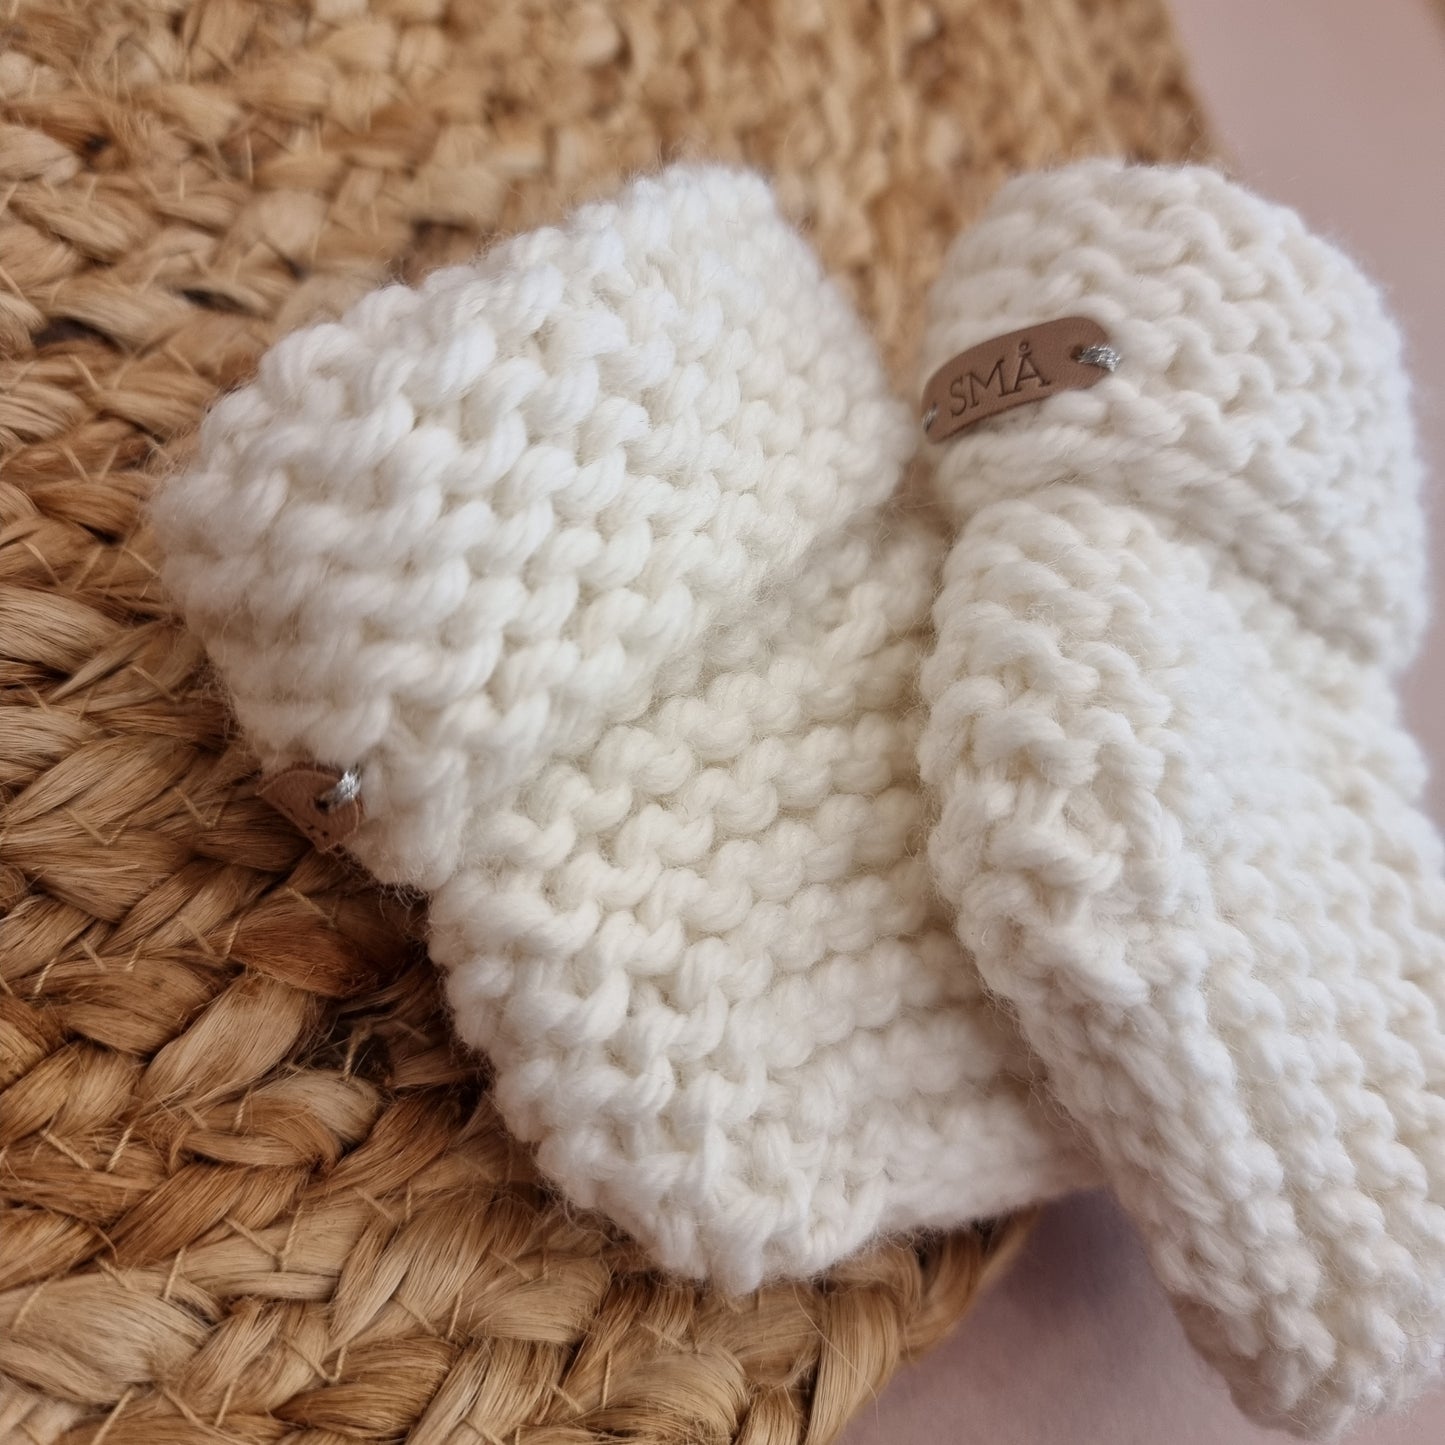 CHUBBY hand knitted booties